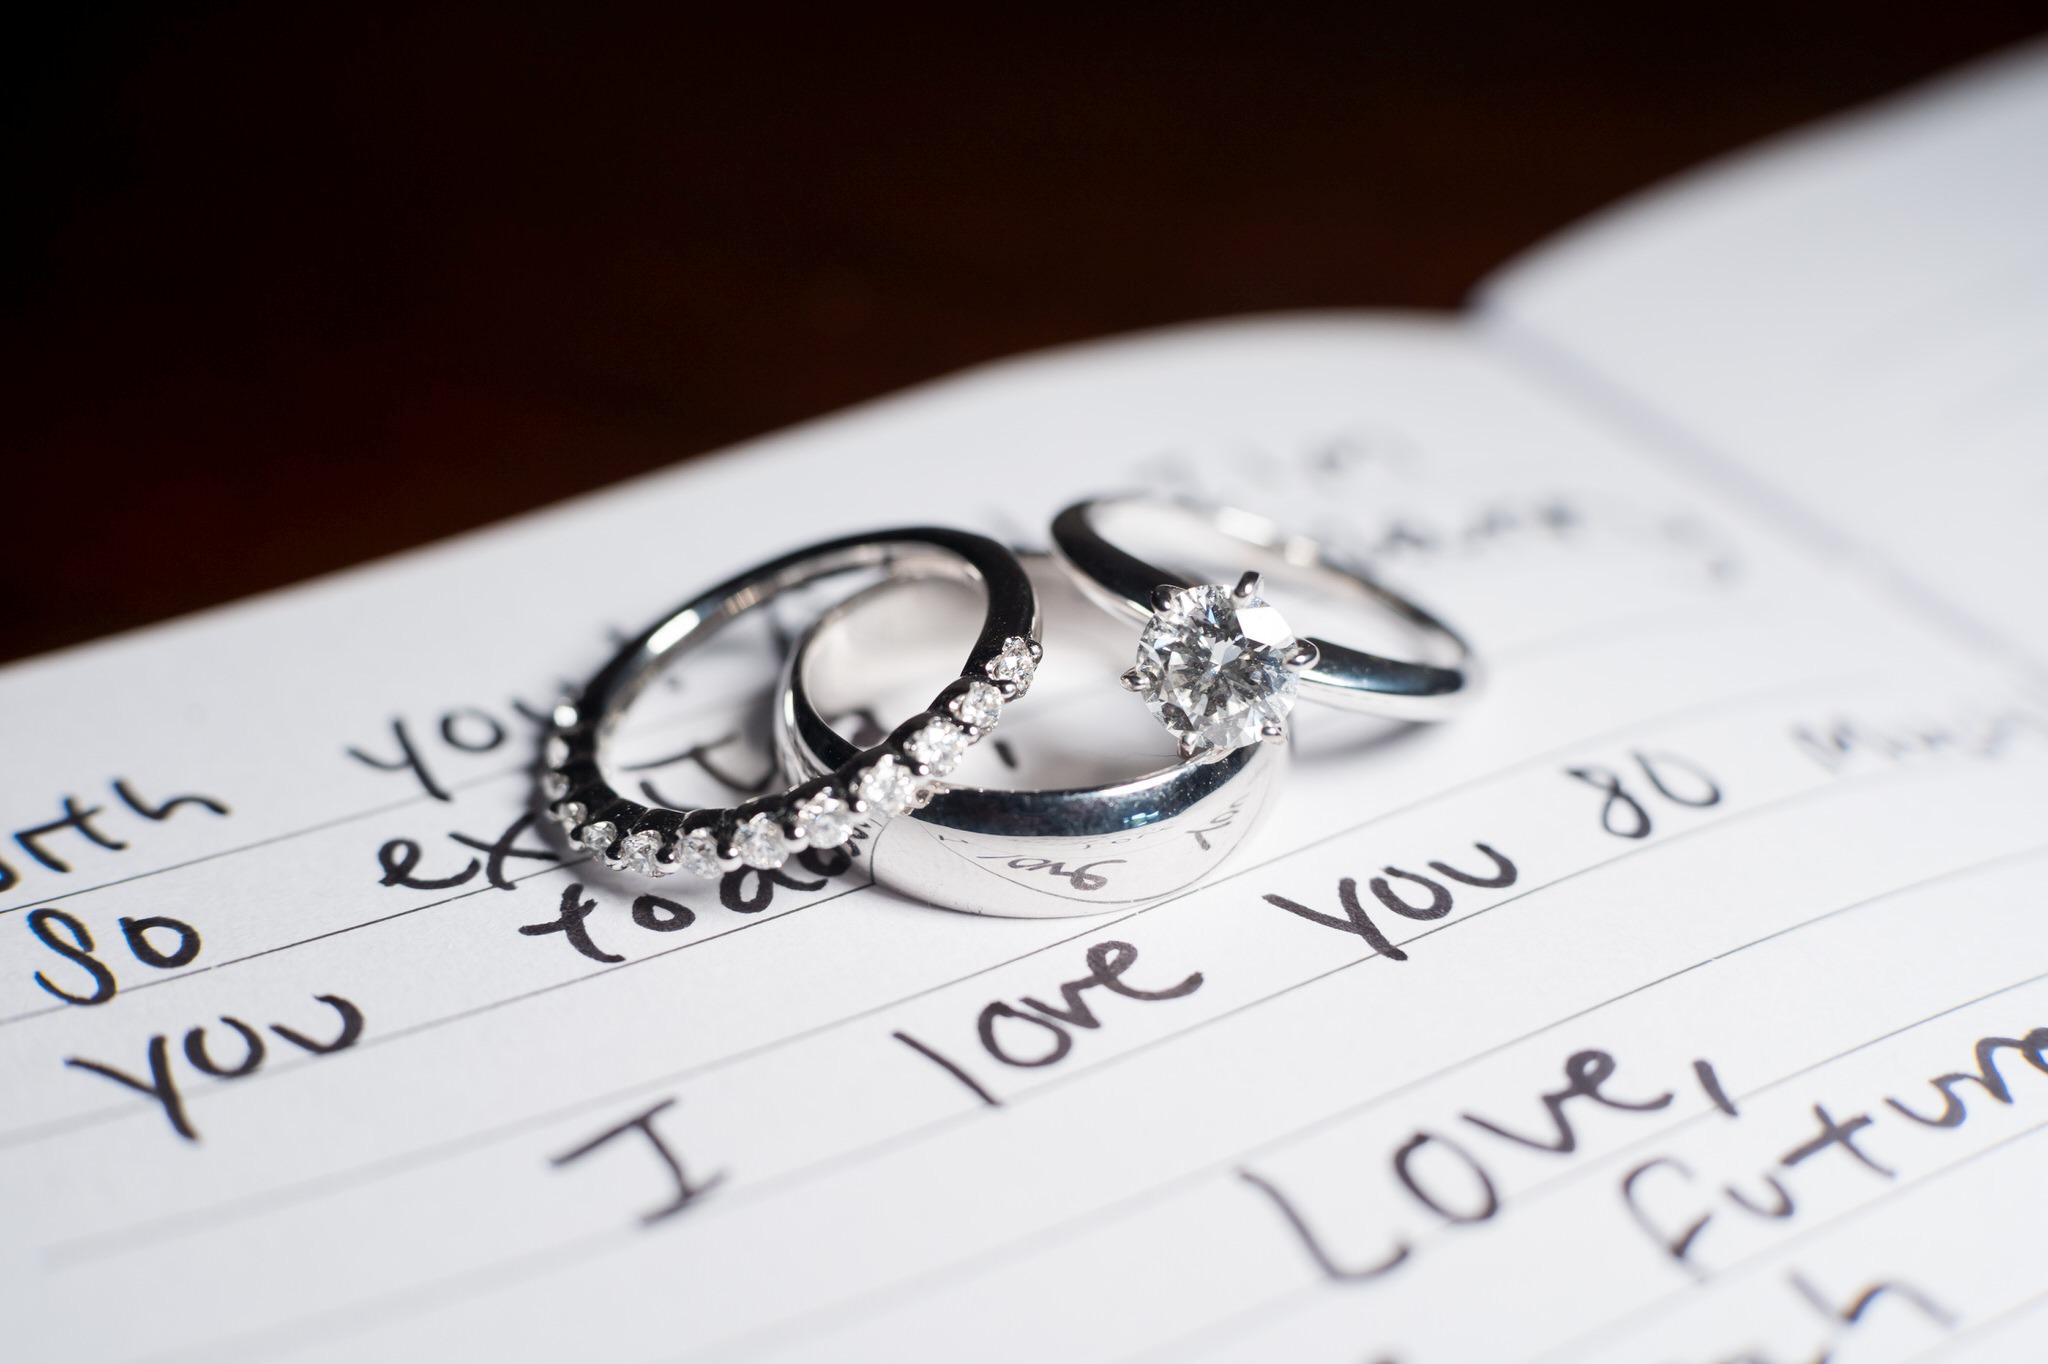 Three wedding rings balancing on a hand written note that reads "I love you."